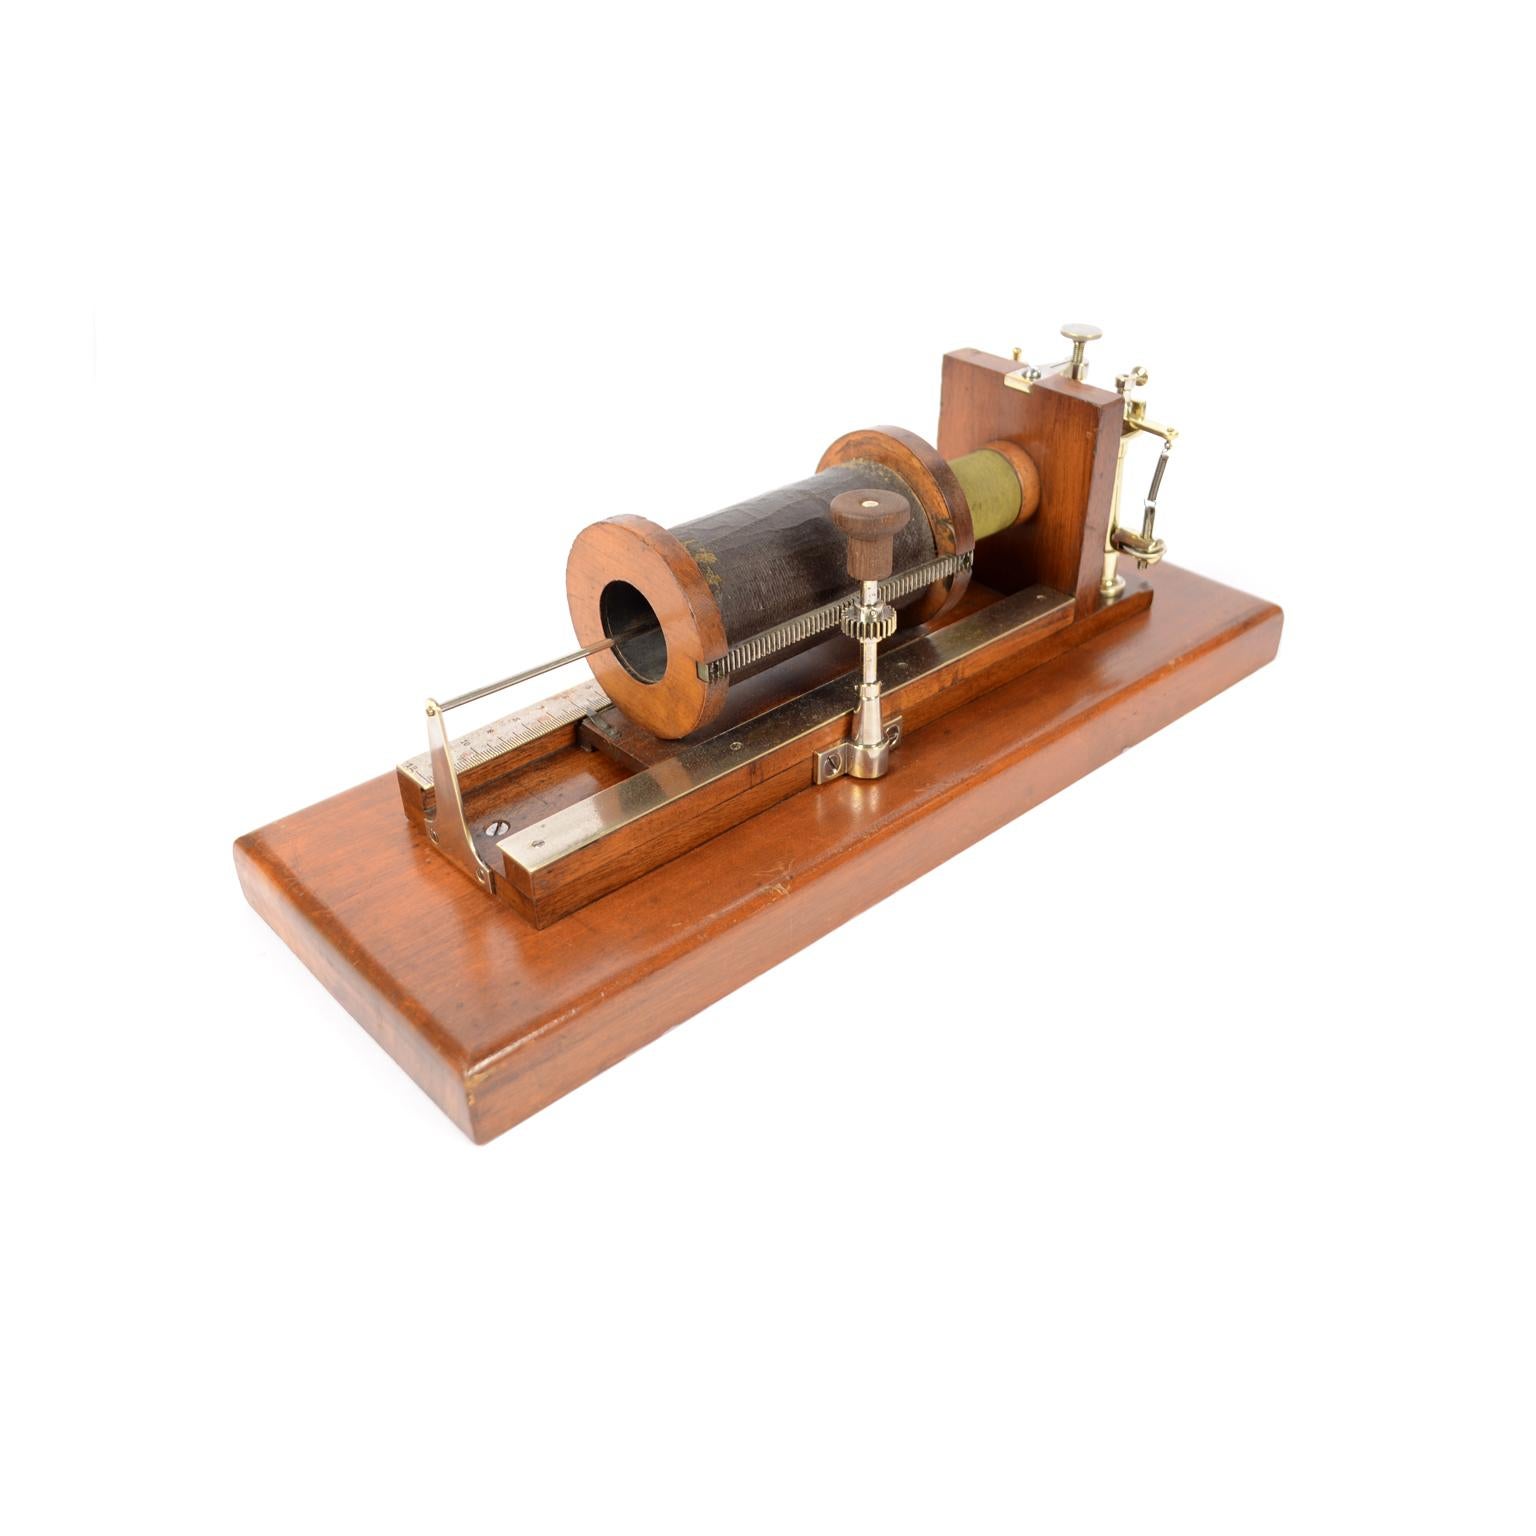 Late 19th Century Induction Coil or Sled Antique Scientific Instrument by Du Bois Reymond 1870  For Sale